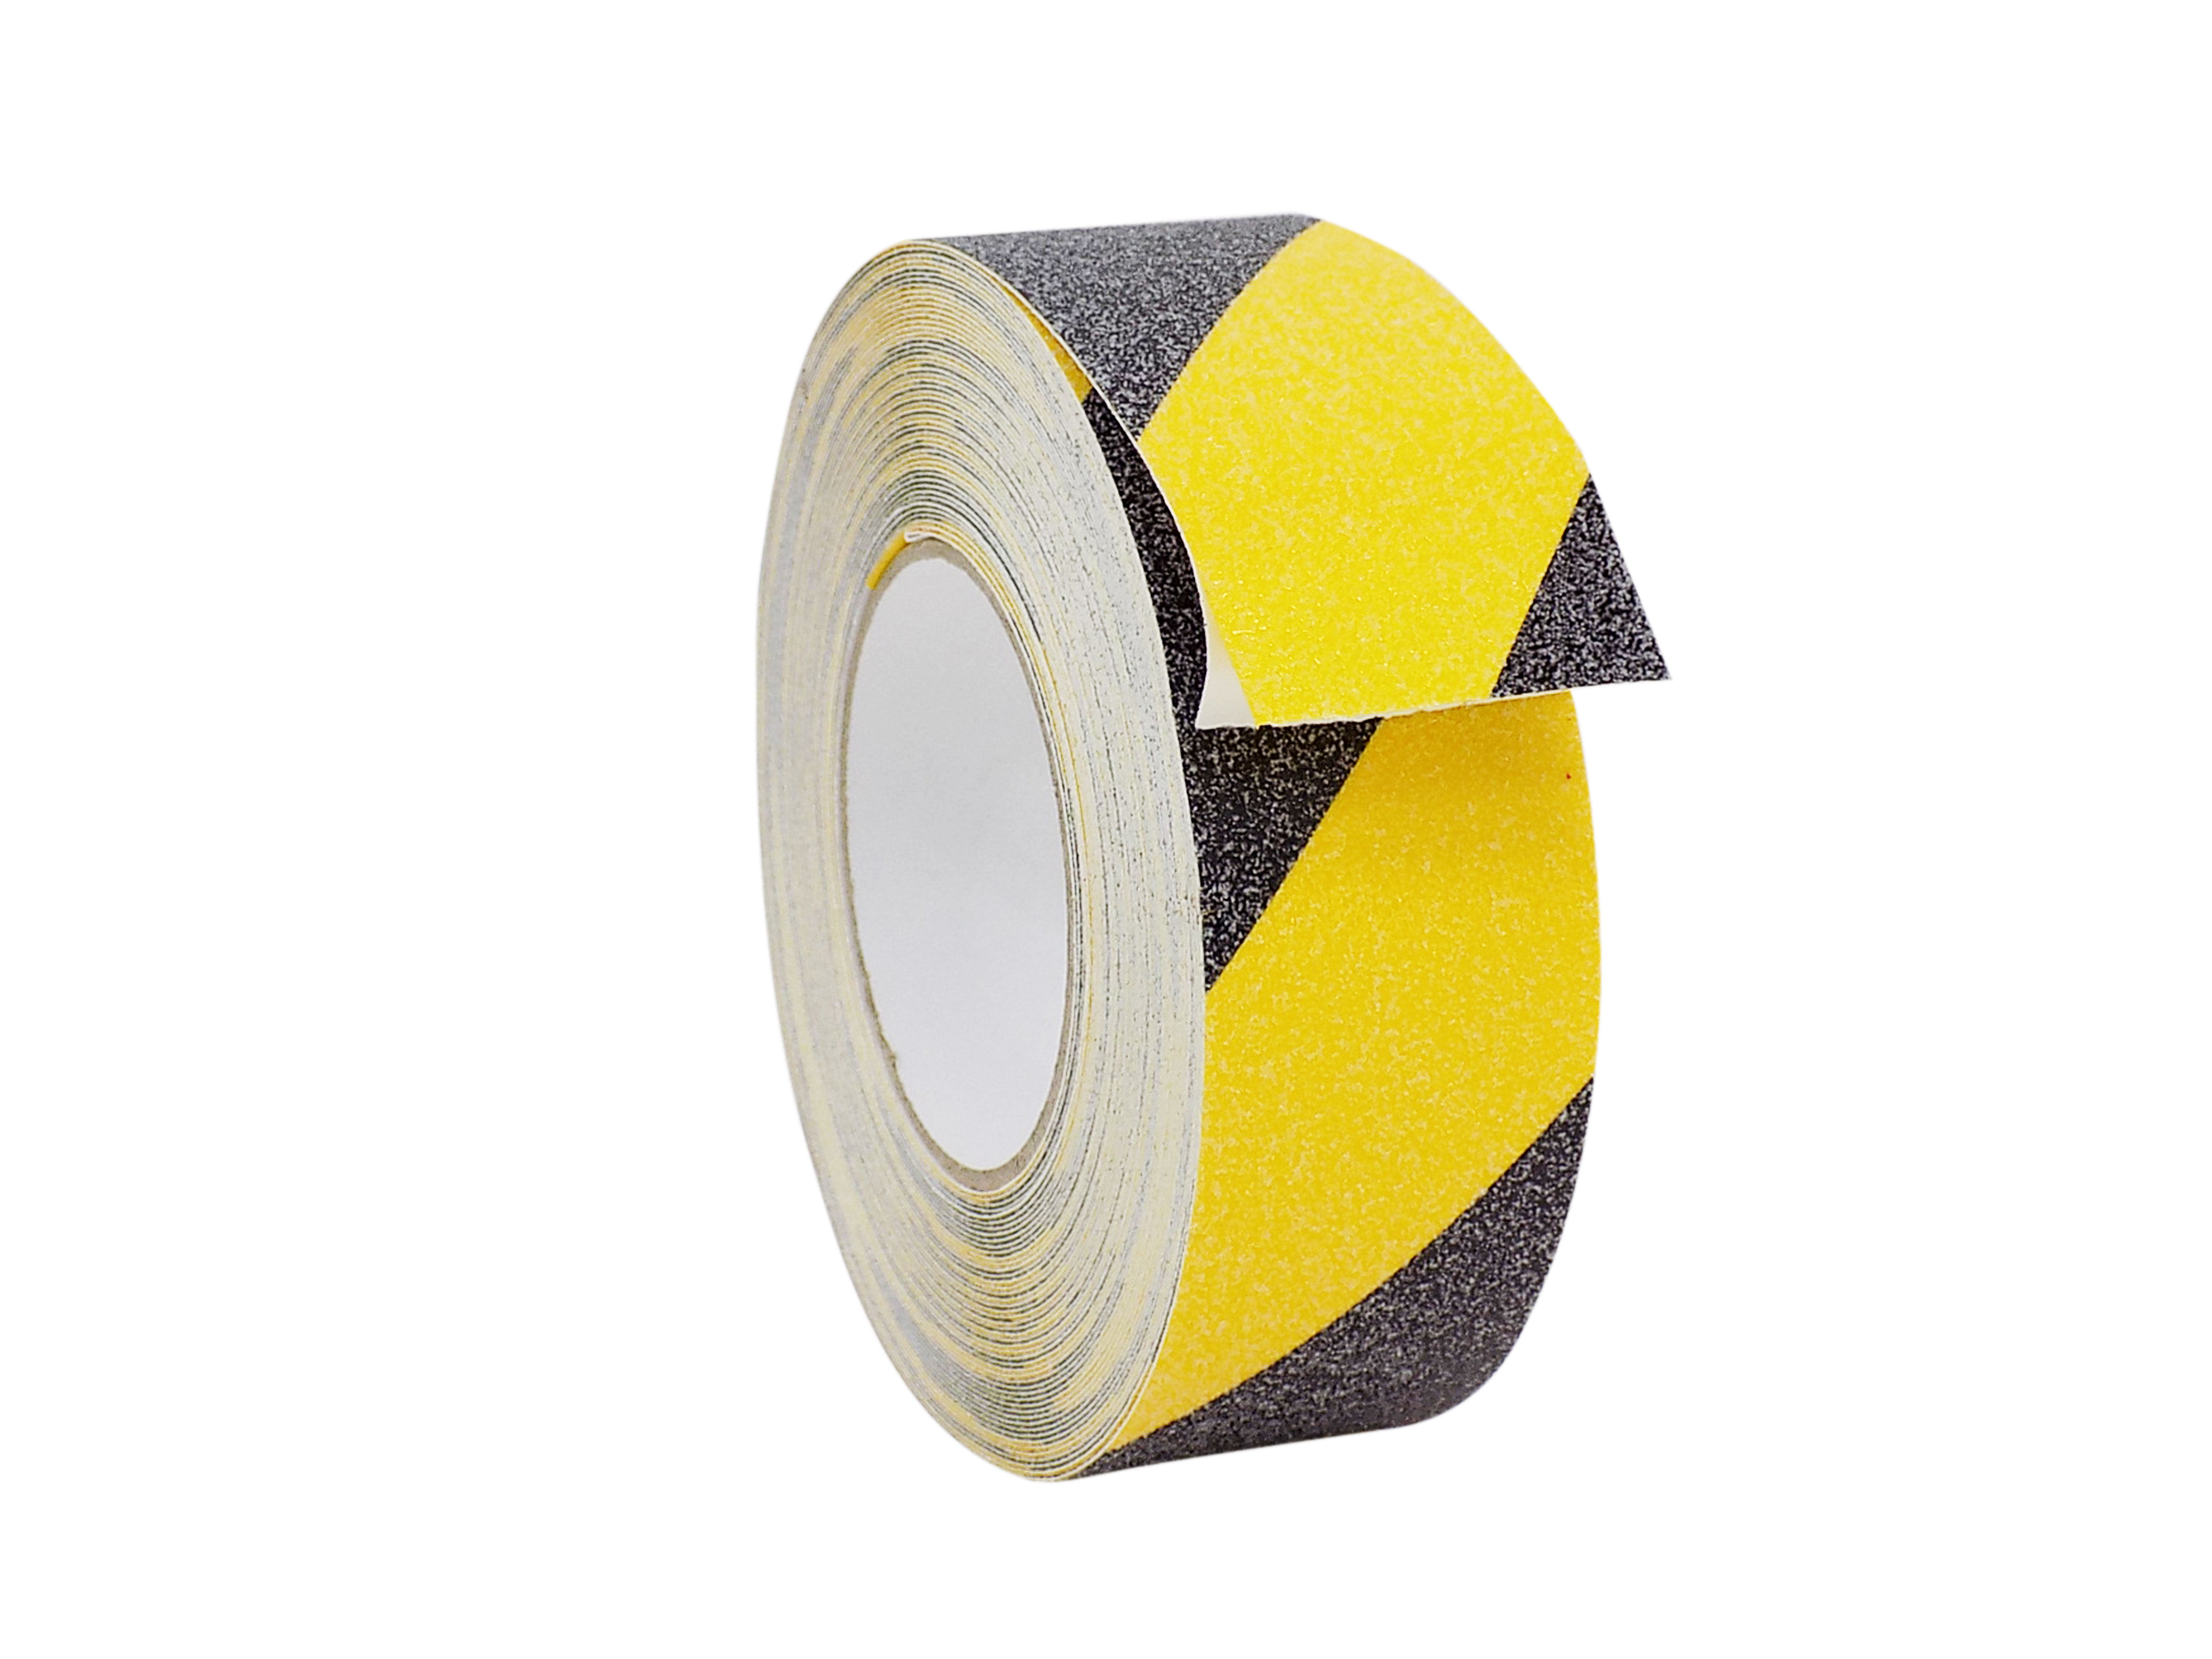 Anti Slip Tape Non Skid High Grip Strong Adhesive Safety Flooring Sticky Backed 